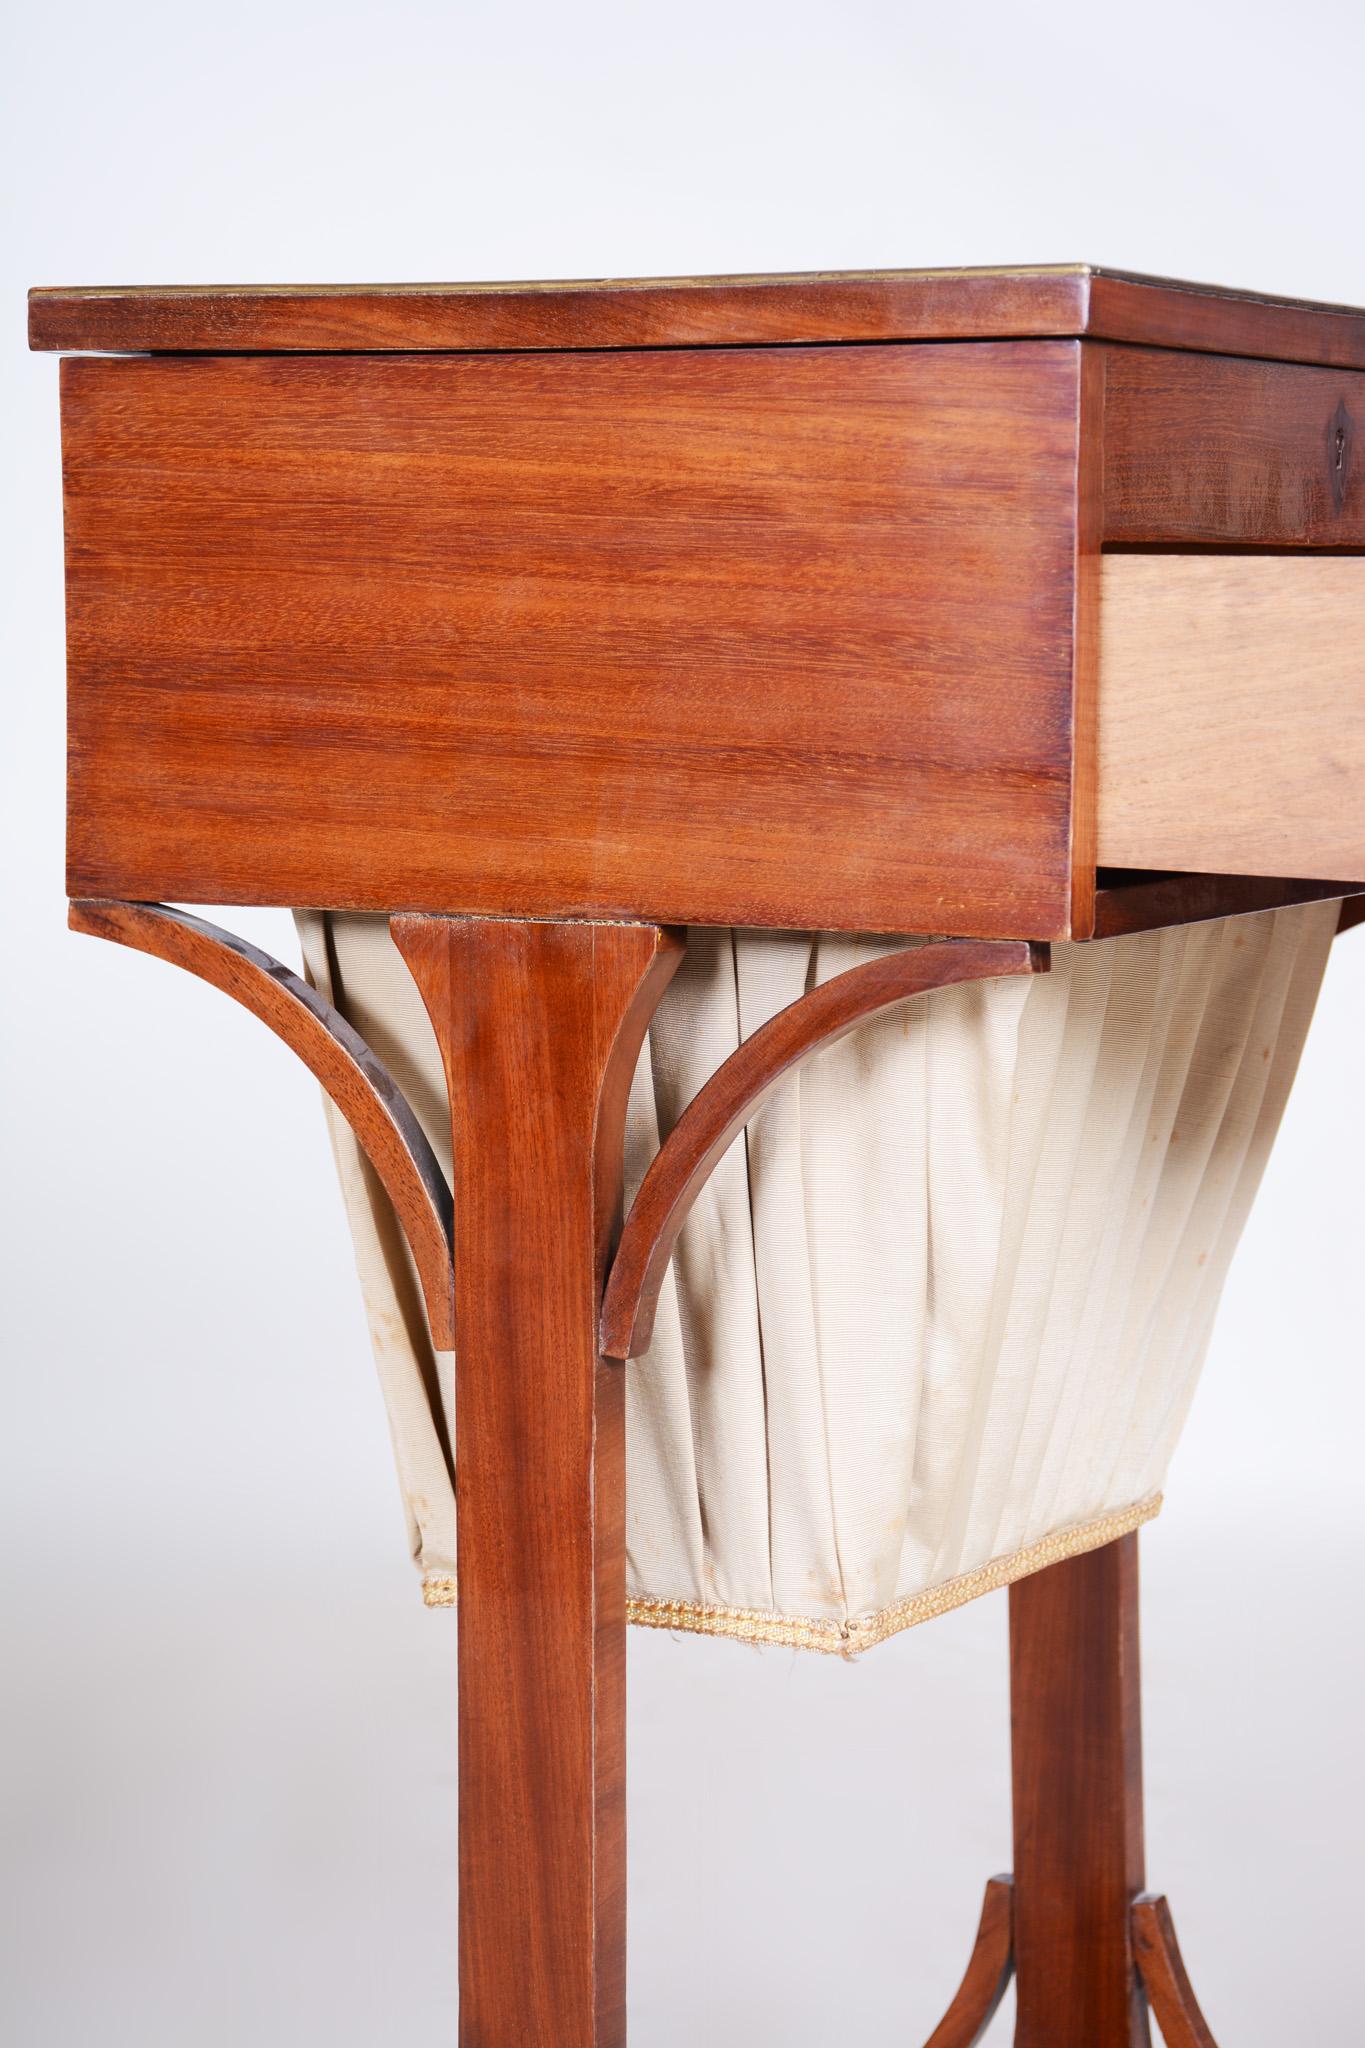 19th Century Restored German Biedermeier Table, Made with Mahogany, 1820s For Sale 8